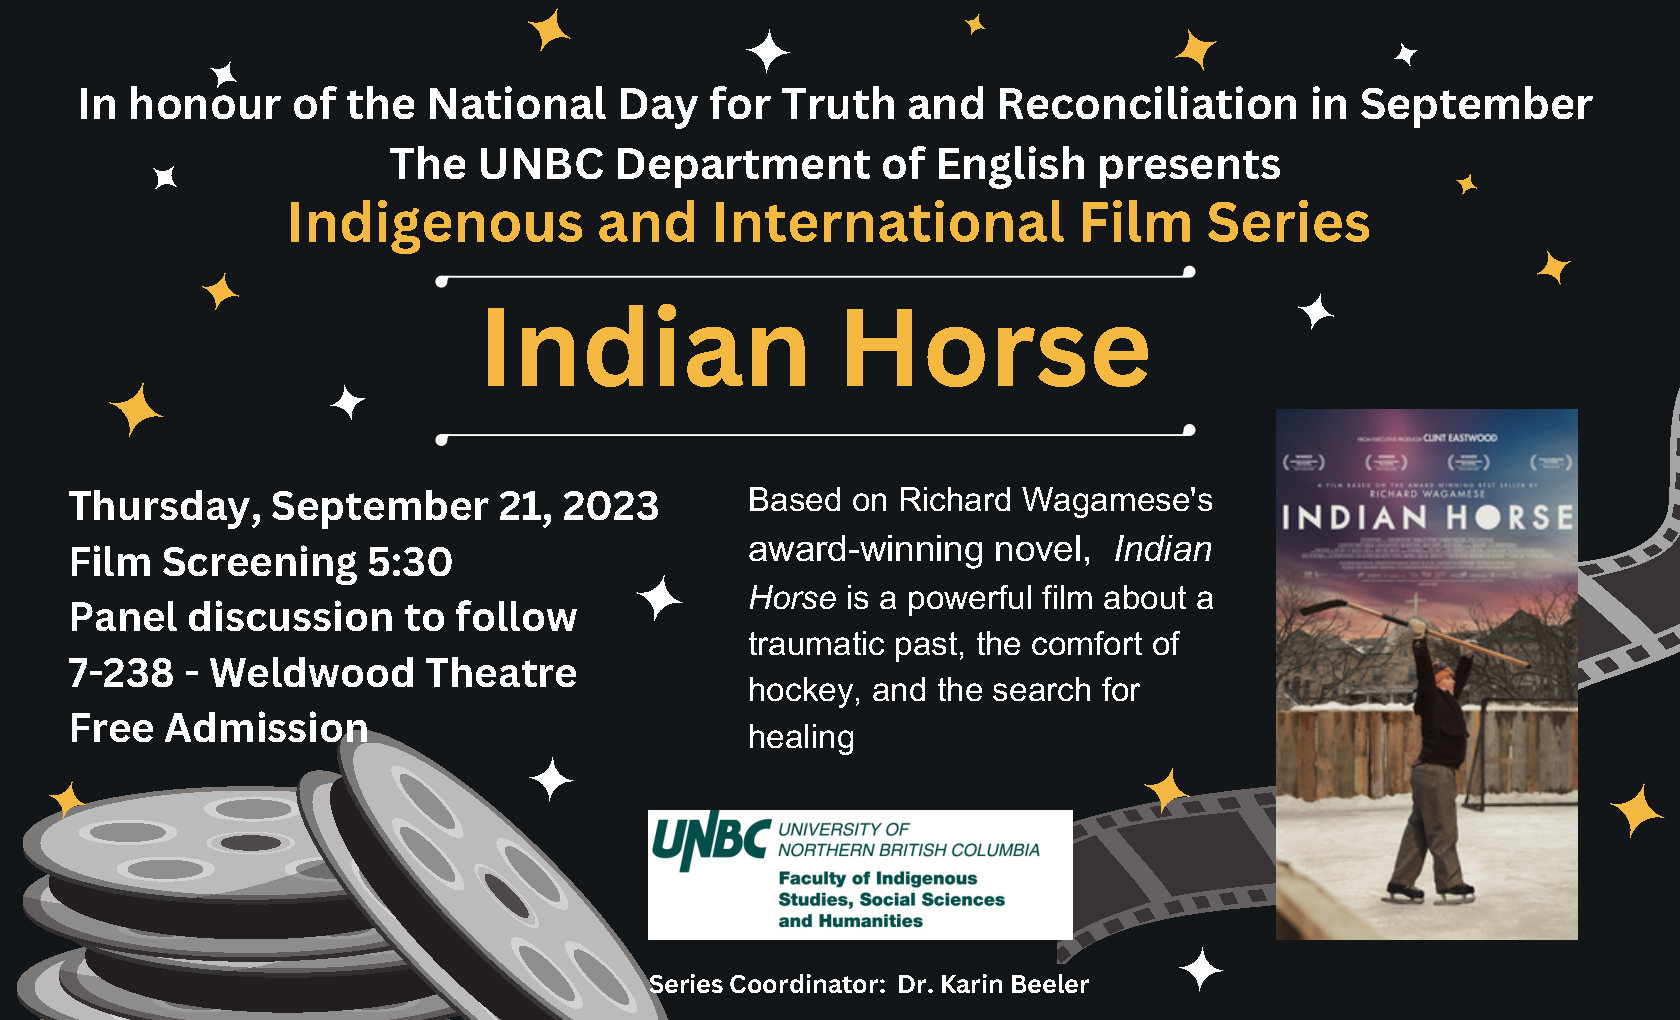 Indian Horse